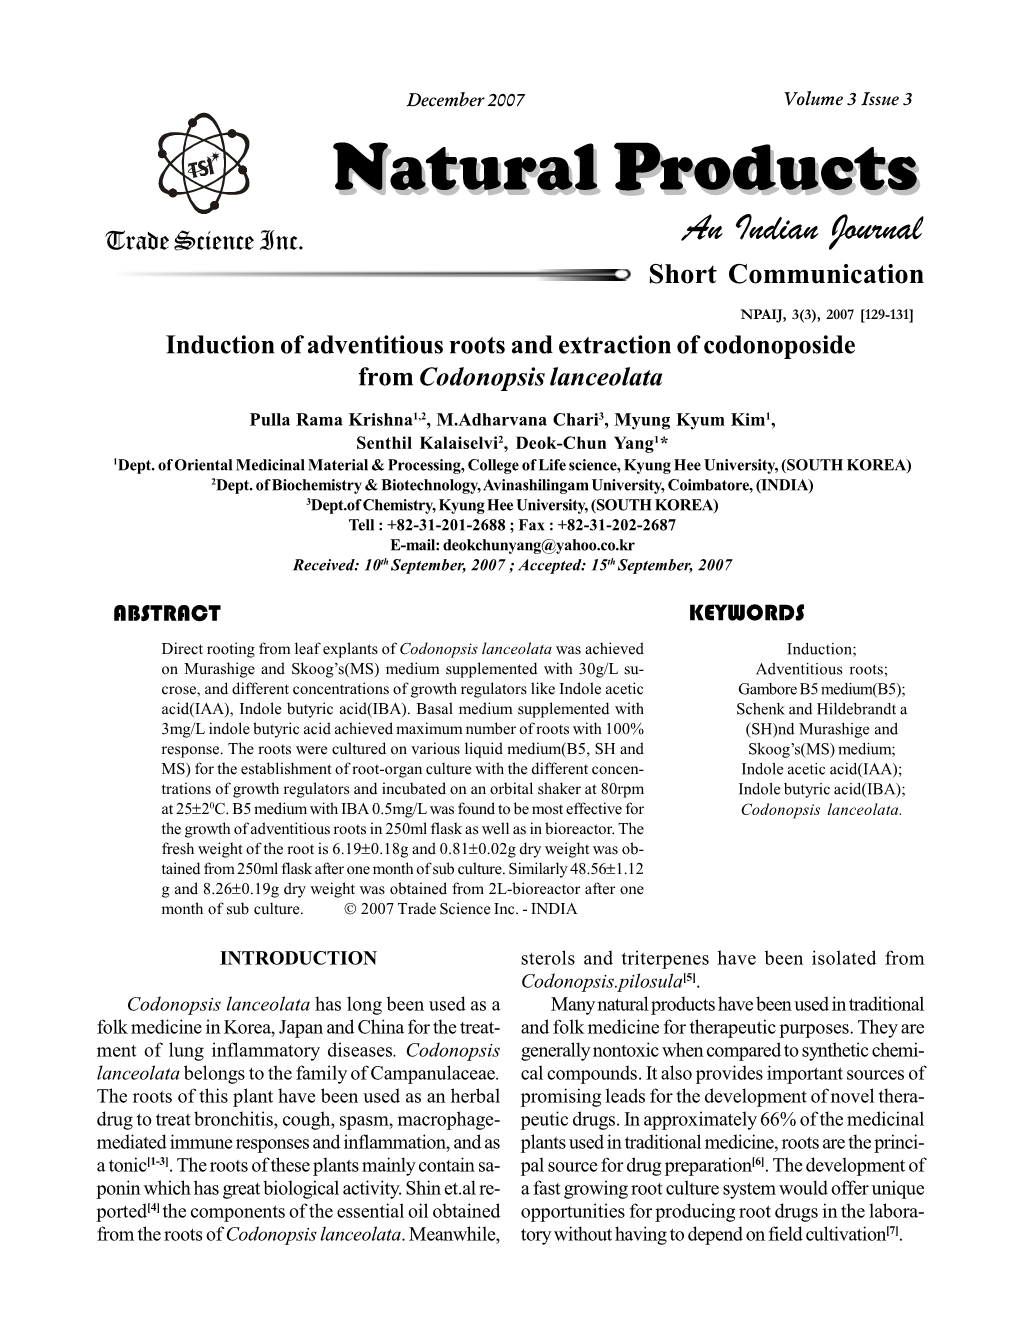 Induction of Adventitious Roots and Extraction of Codonoposide from Codonopsis Lanceolata